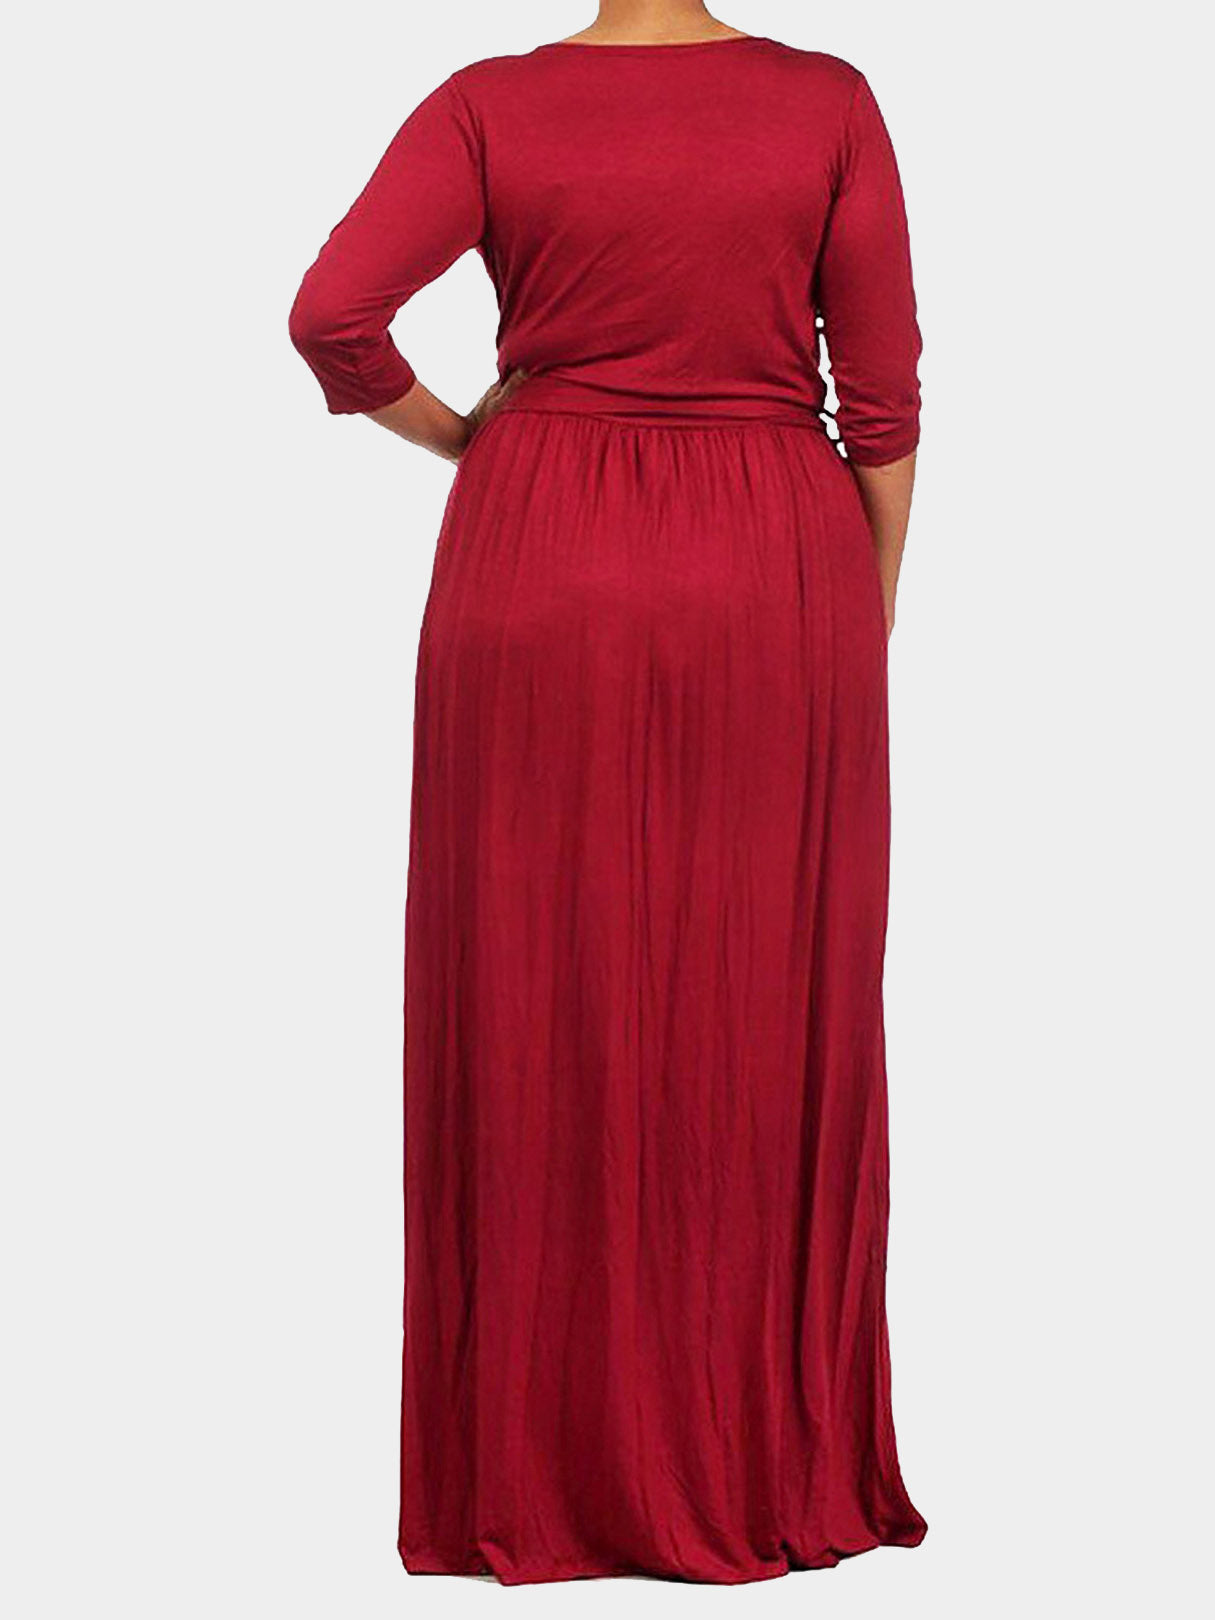 NEW FEELING Womens Red Plus Size Dresses